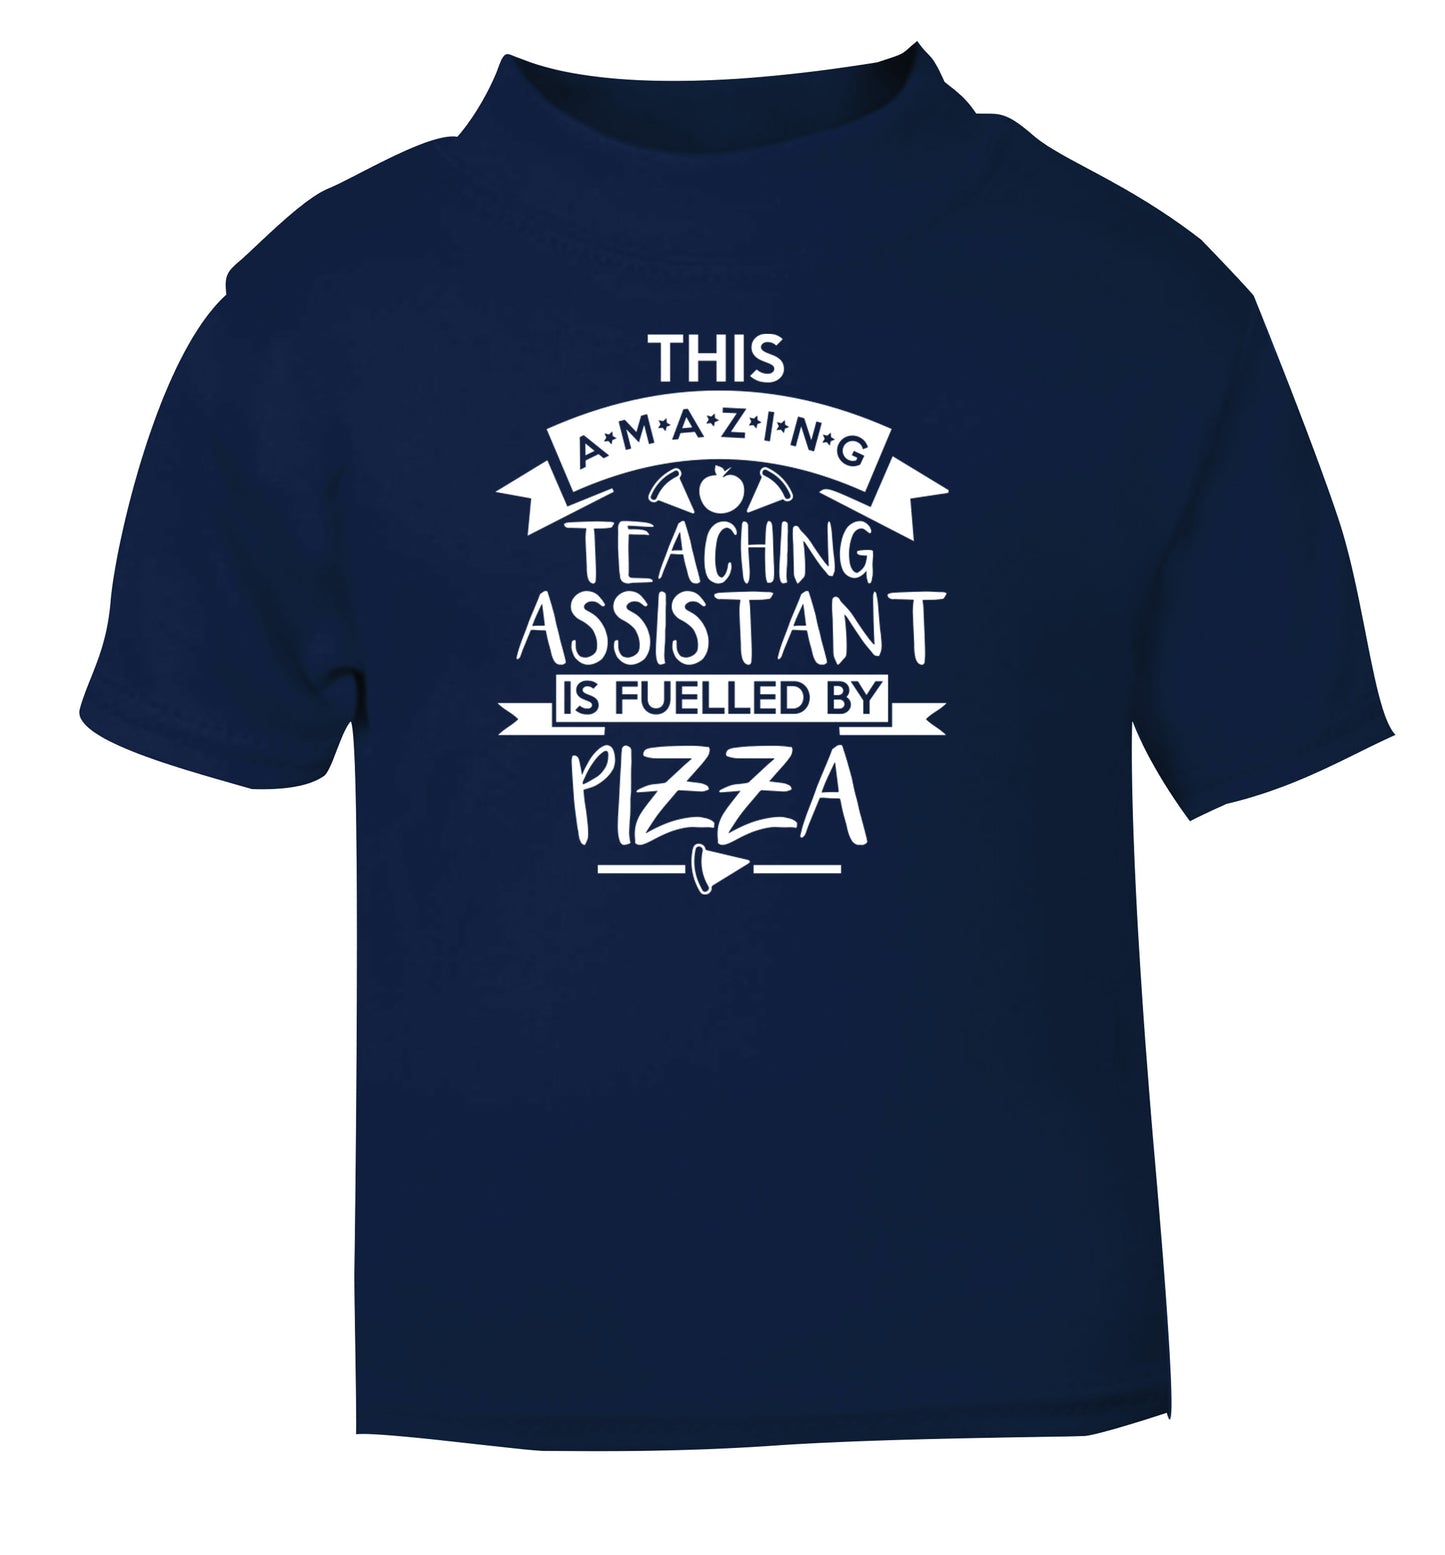 This amazing teaching assistant is fuelled by pizza navy Baby Toddler Tshirt 2 Years